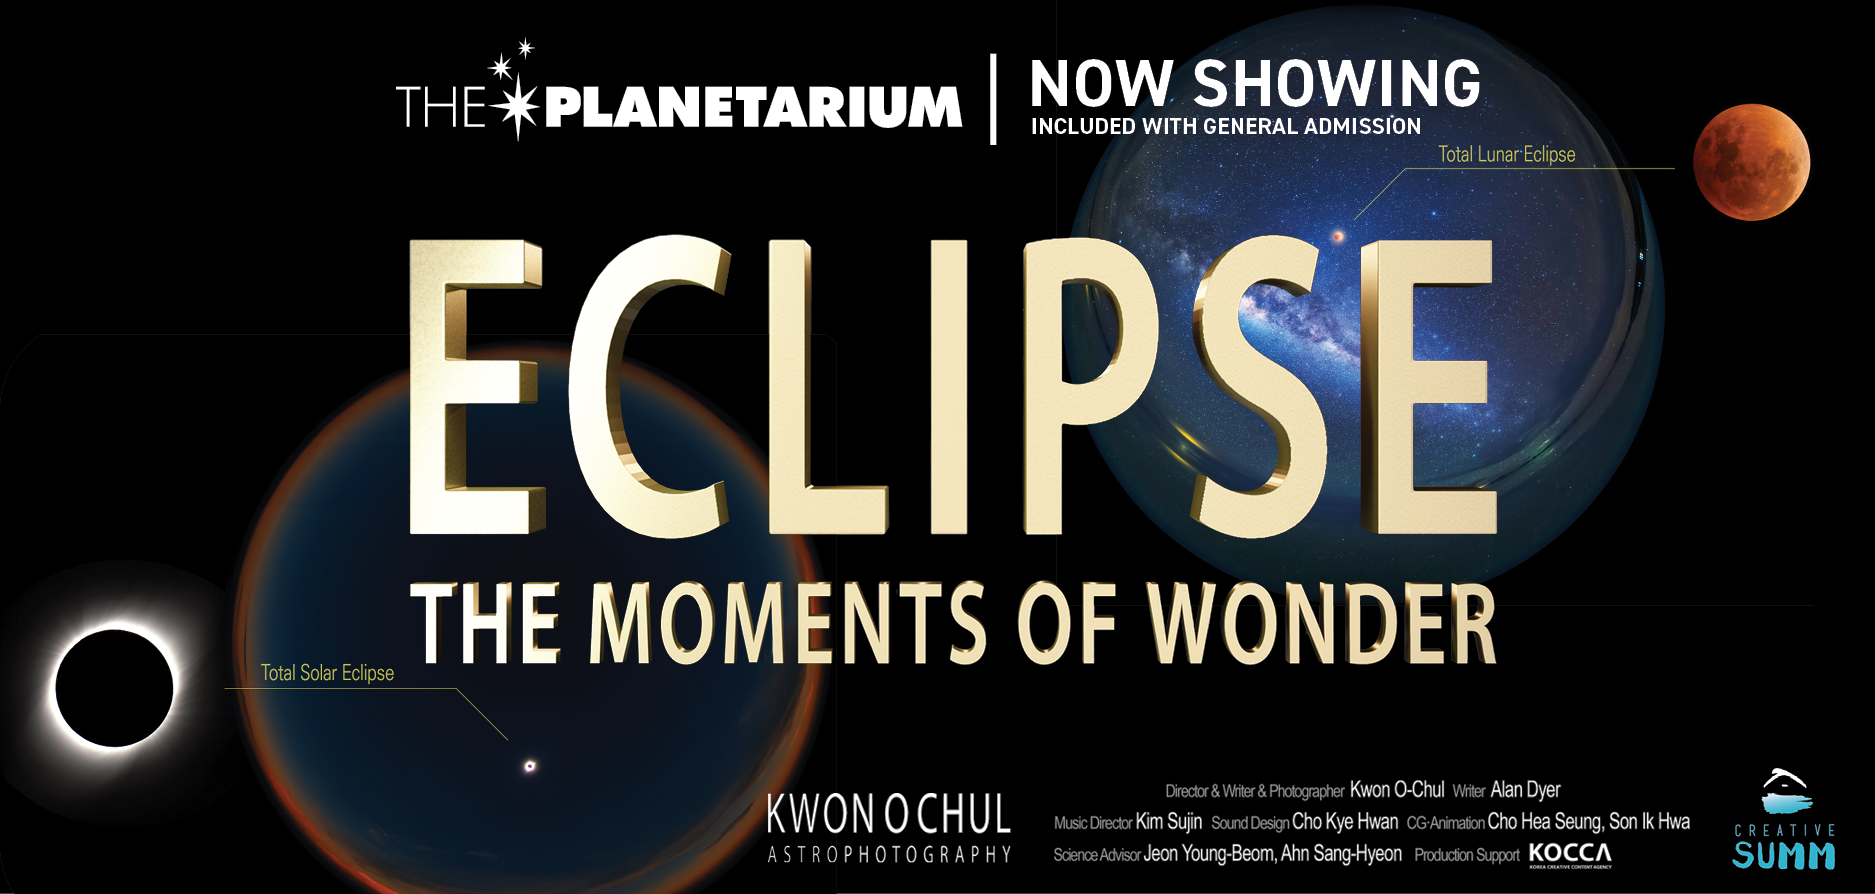 Read more about the planetarium show